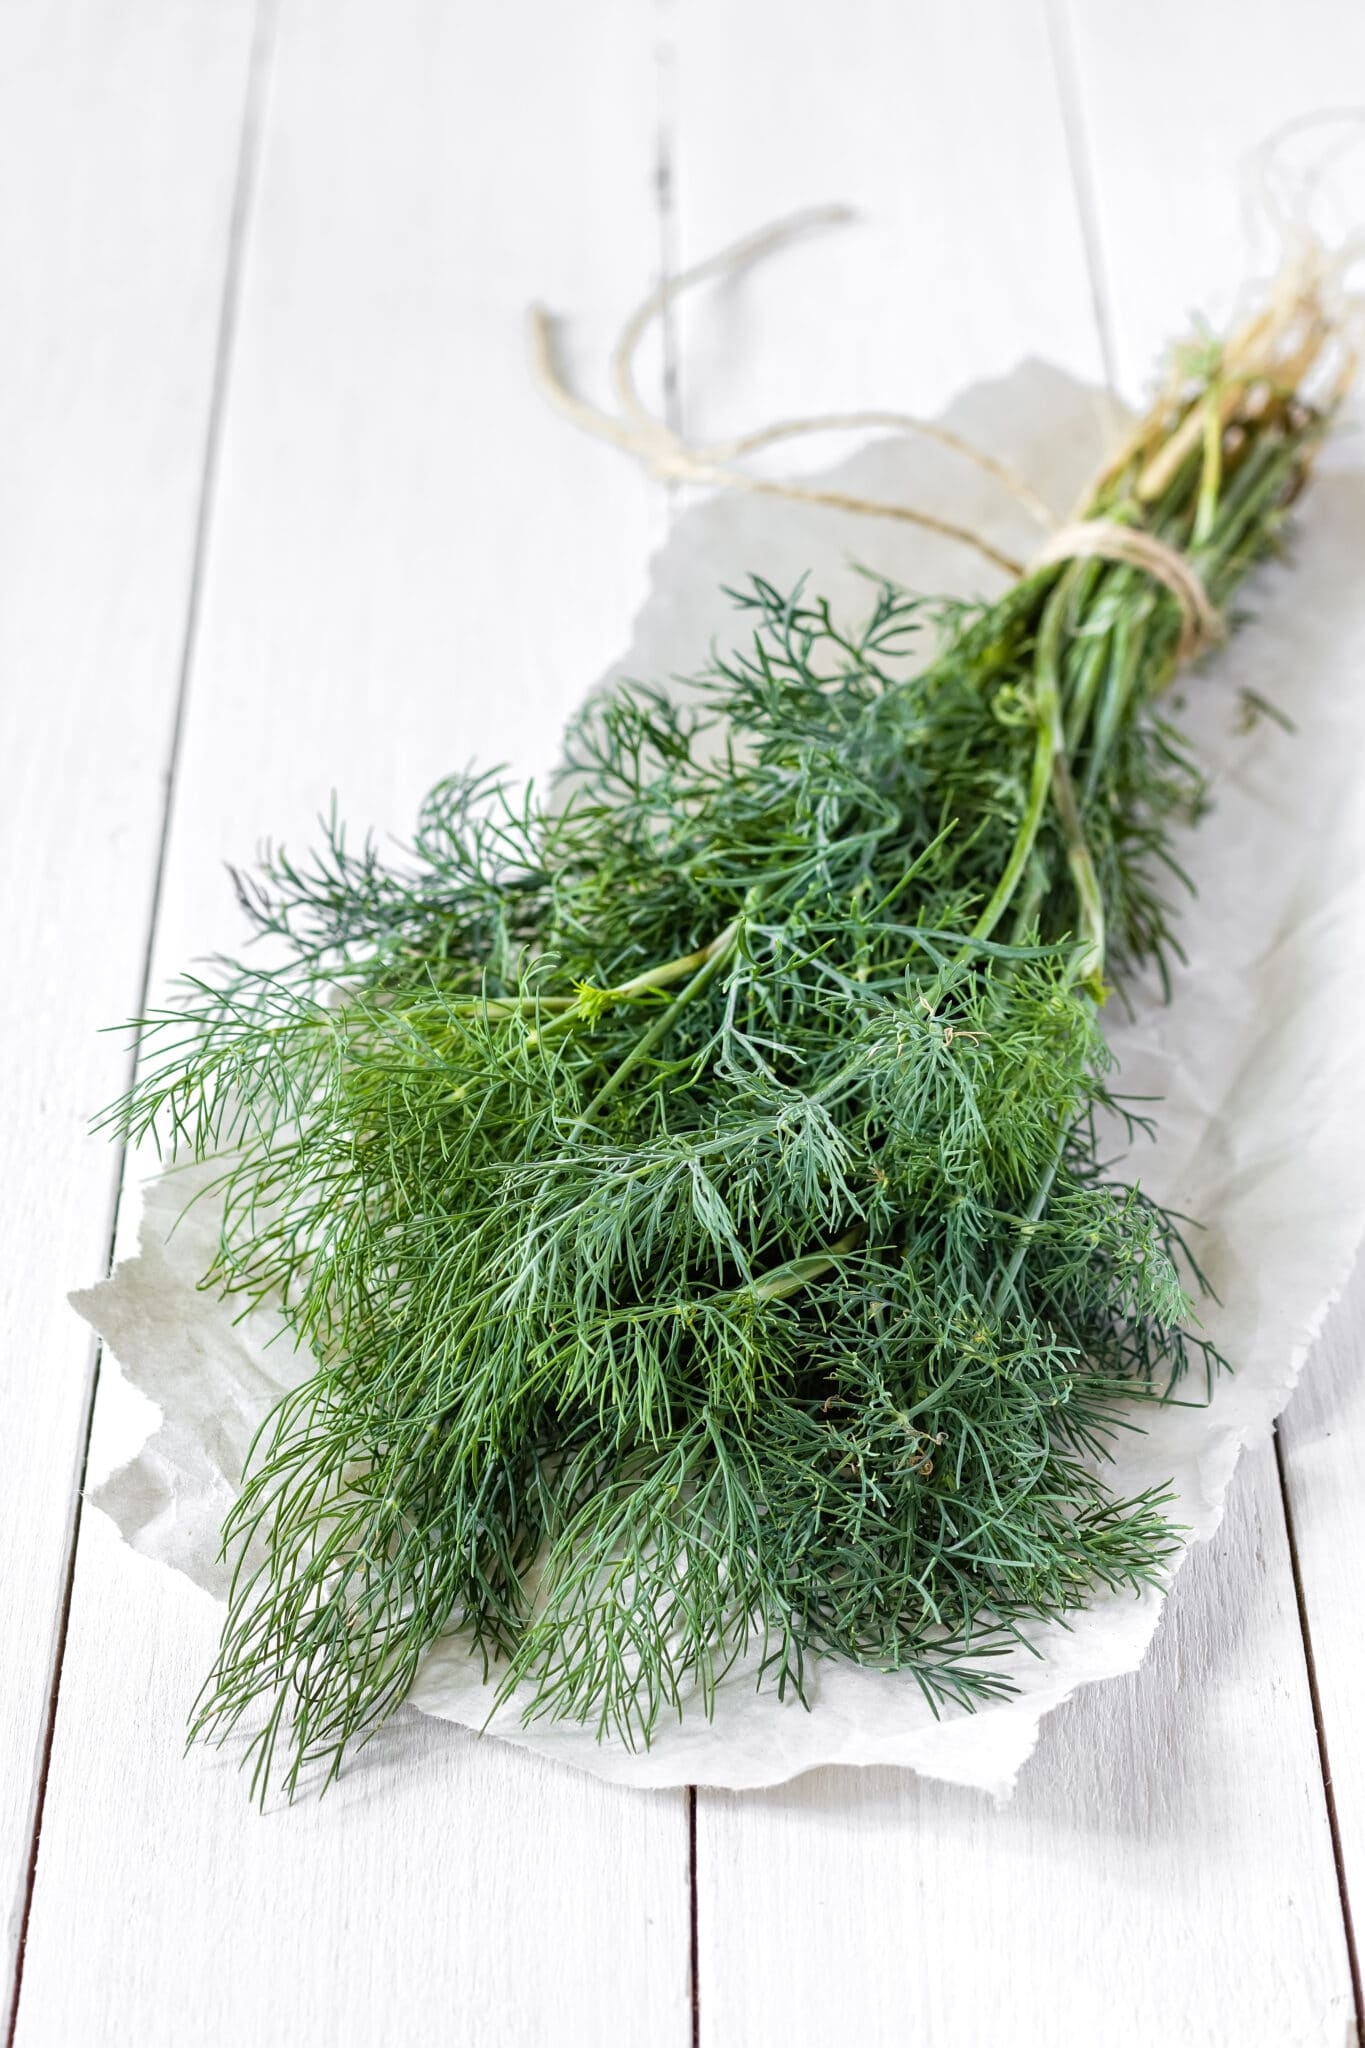 Growing and harvesting dill, Kitchen versatility, Herb's numerous uses, Culinary companion, 1370x2050 HD Handy